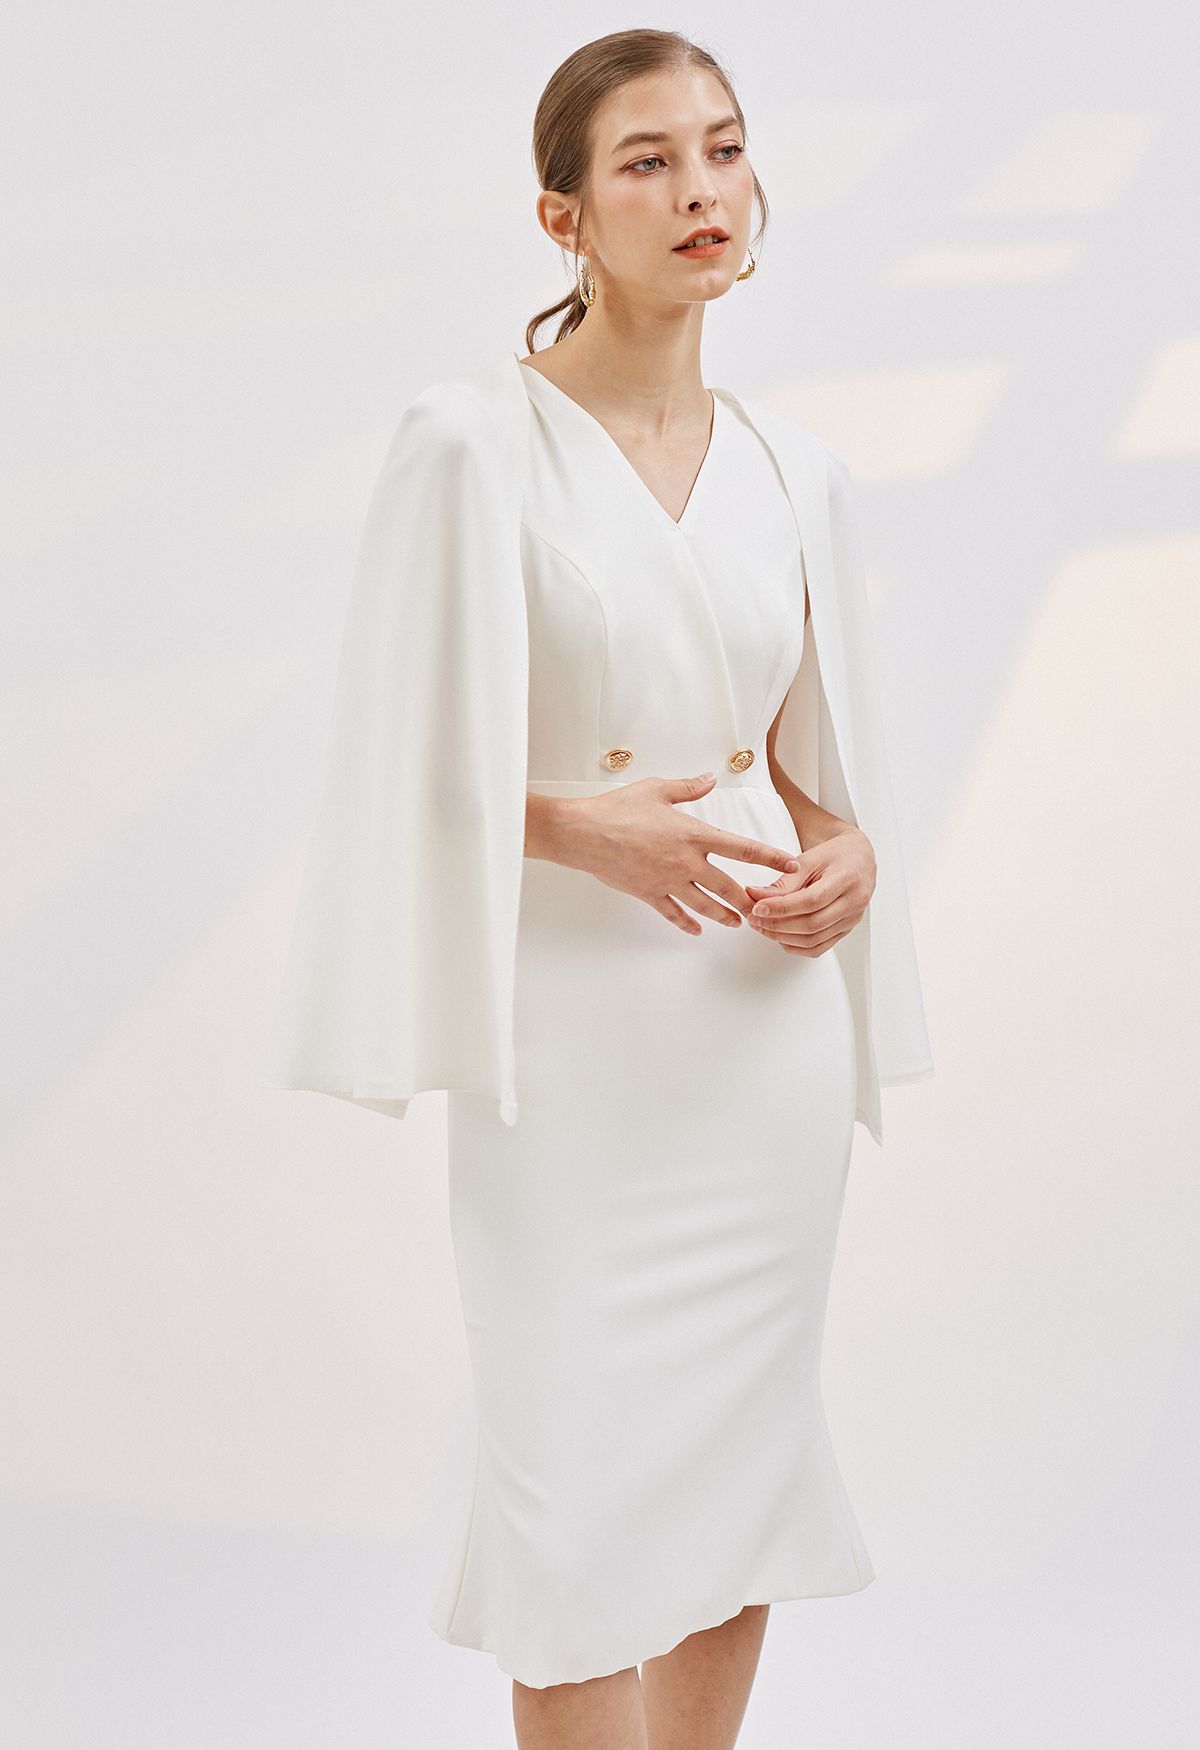 Golden Button Cape Sleeve Cocktail Dress in White